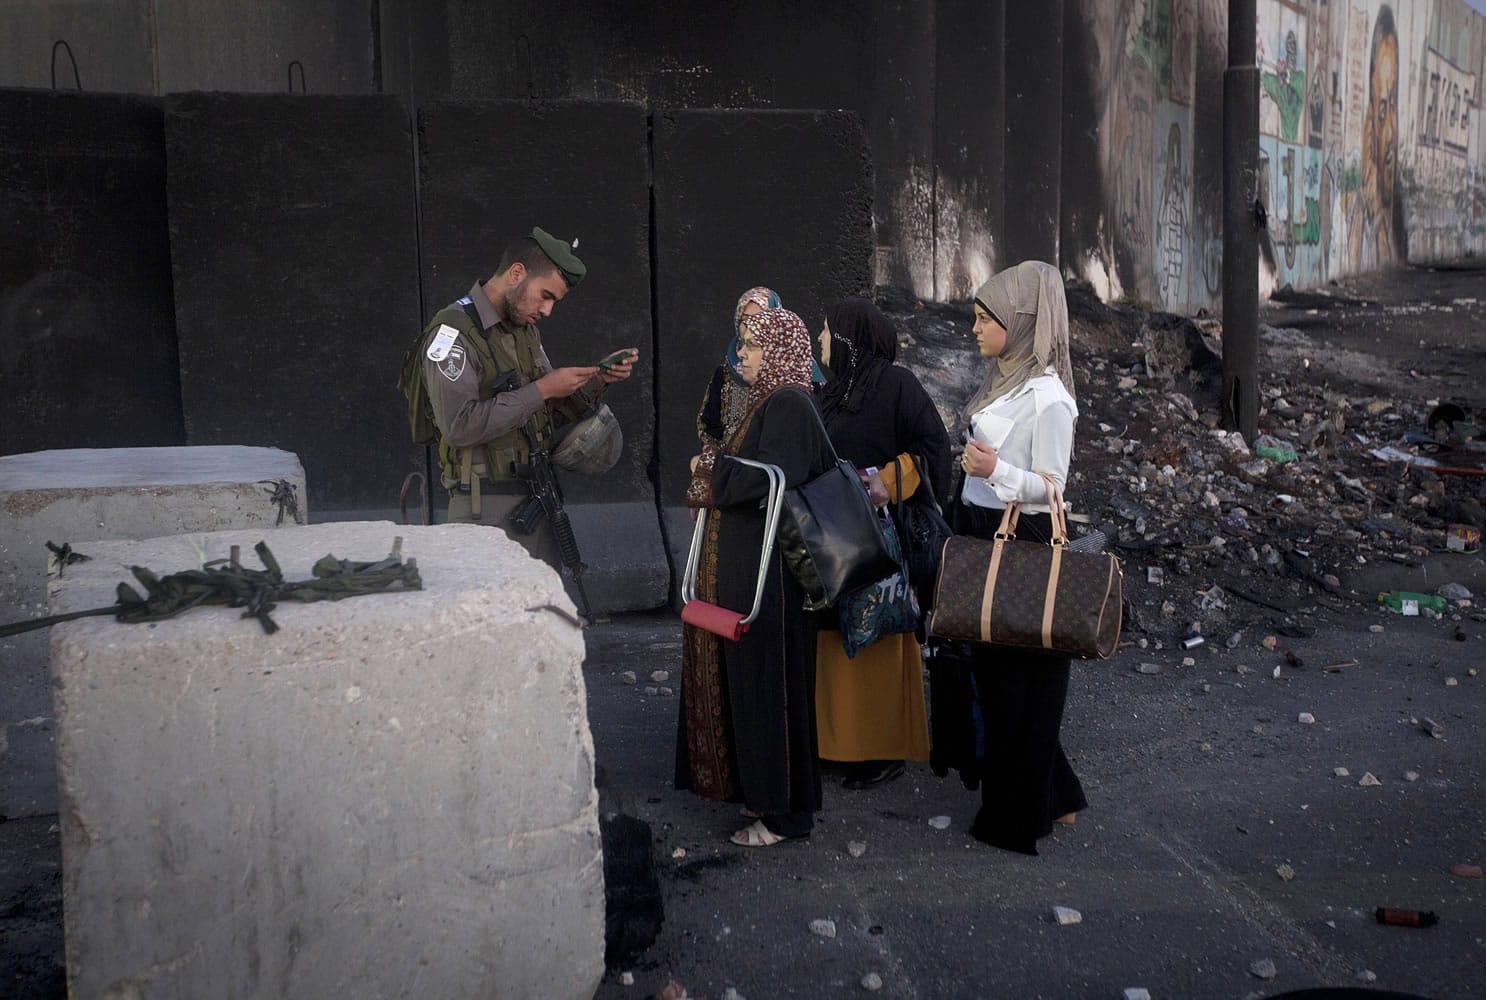 An Israeli border police officer checks documents of Palestinian women on their way to pray at the Al-Aqsa Mosque in Jerusalem during the Muslim holy month of Ramadan at the Qalandia checkpoint, between the West Bank city of Ramallah and Jerusalem on Friday.